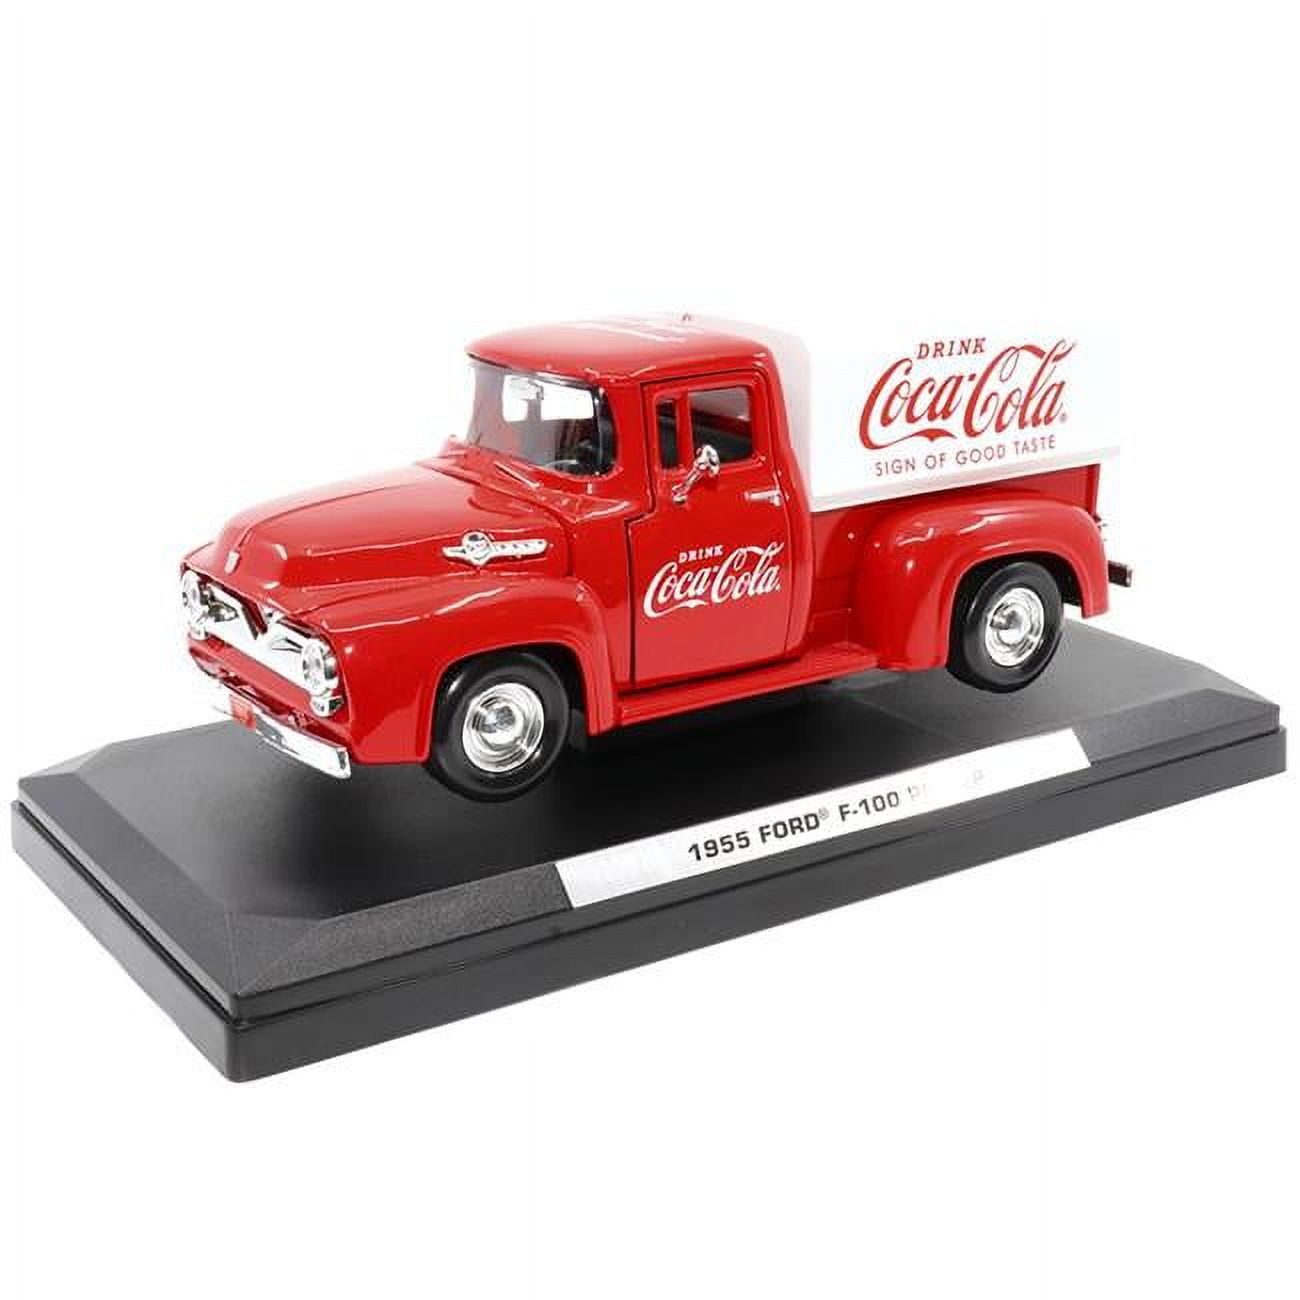 Motorcity Classics 424050 1955 Ford F-100 Pickup Truck Red with White Canopy Drink Coca-Cola 1-24 Diecast Model Car -  MOTOR CITY CLASSICS